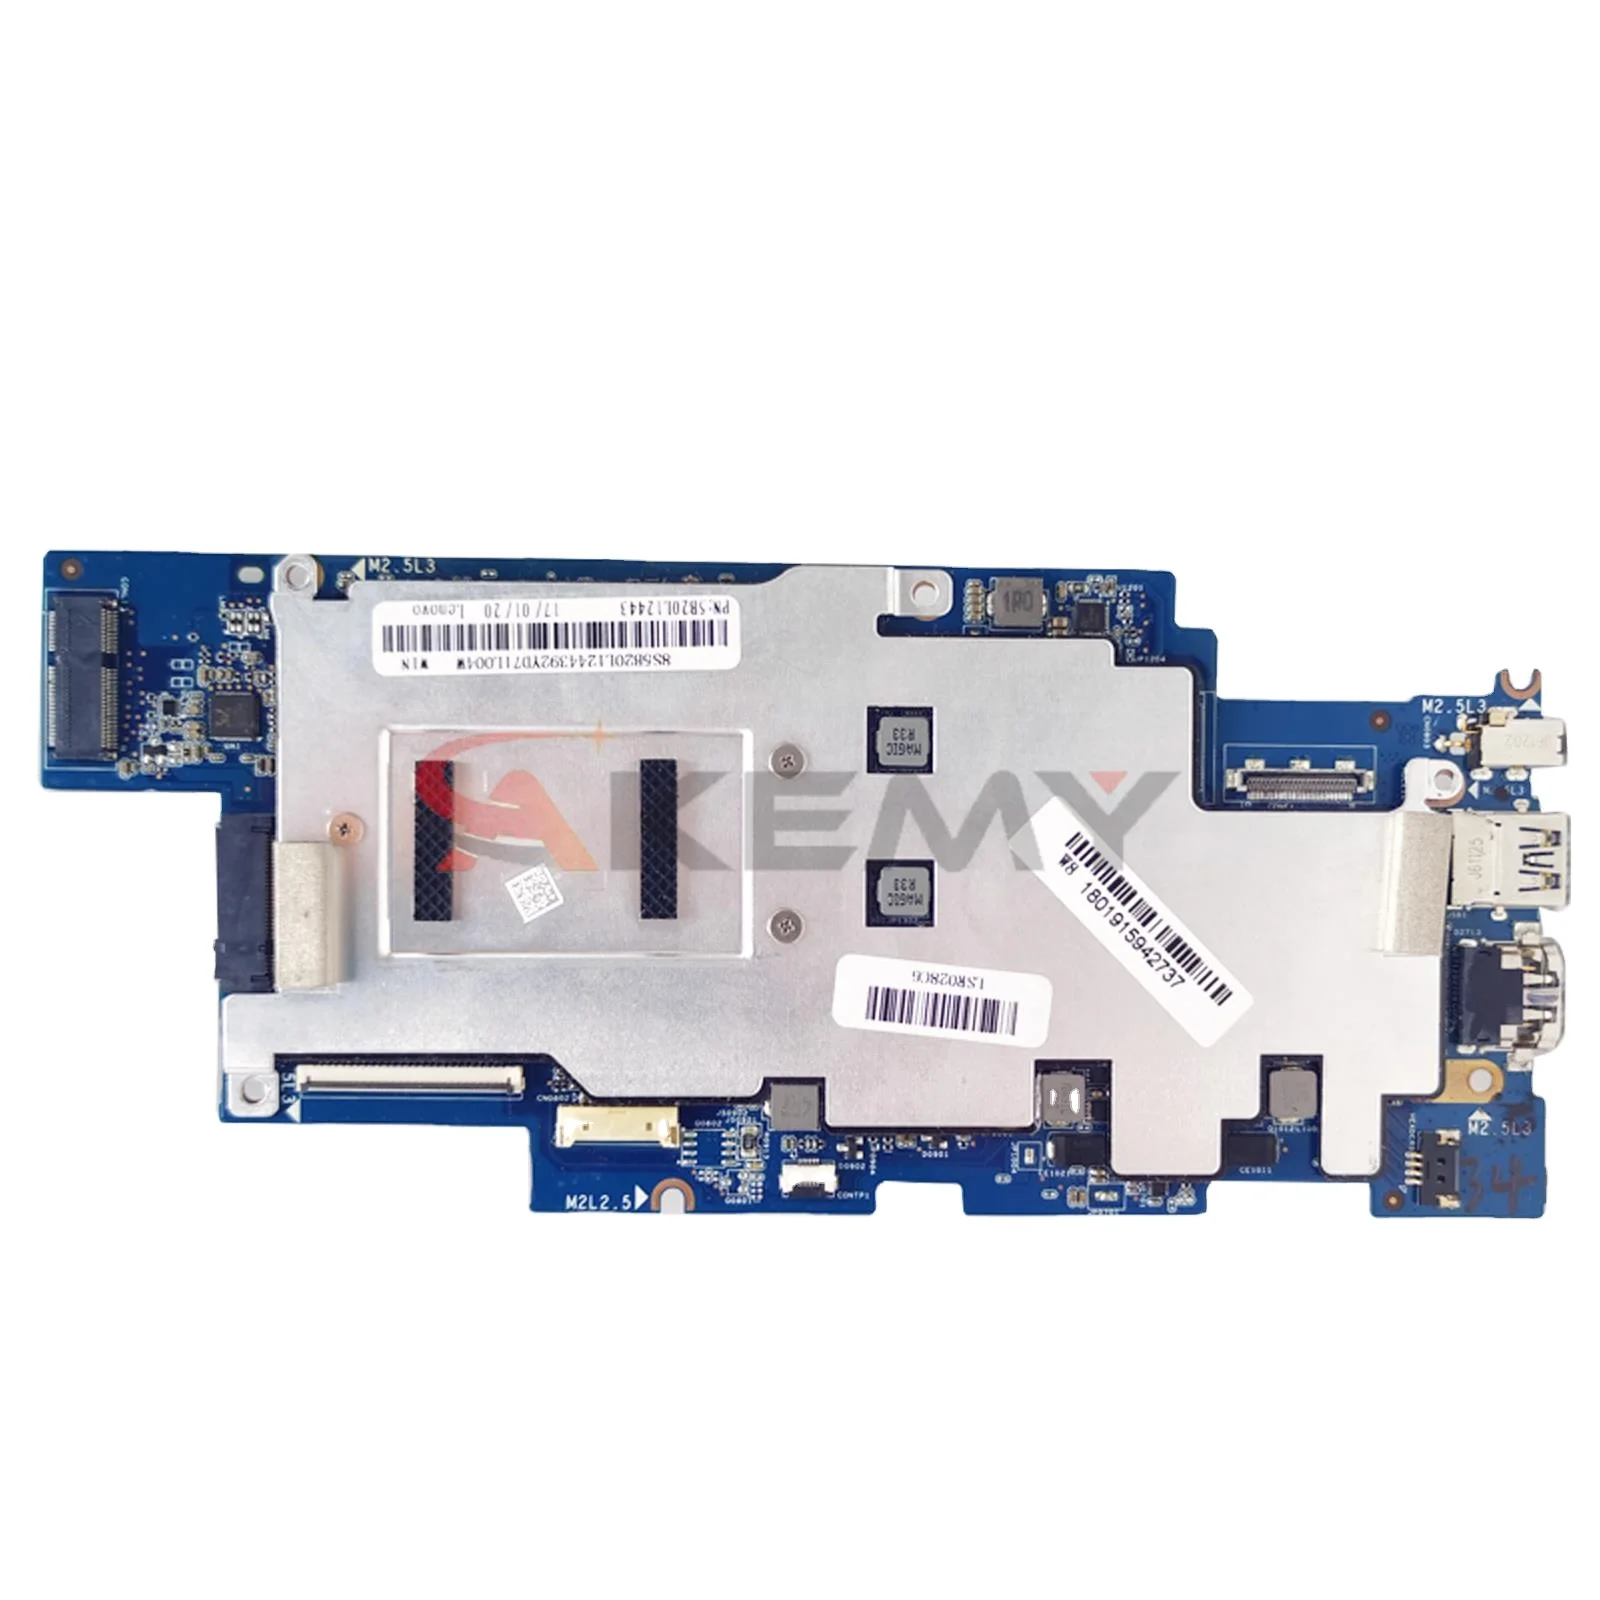 

1501B_01_01 For Lenovo IdeaPad 100S-14IBR notebook motherboard CPU N3060 RAM 4GB carrying SSD 32G 100% test work